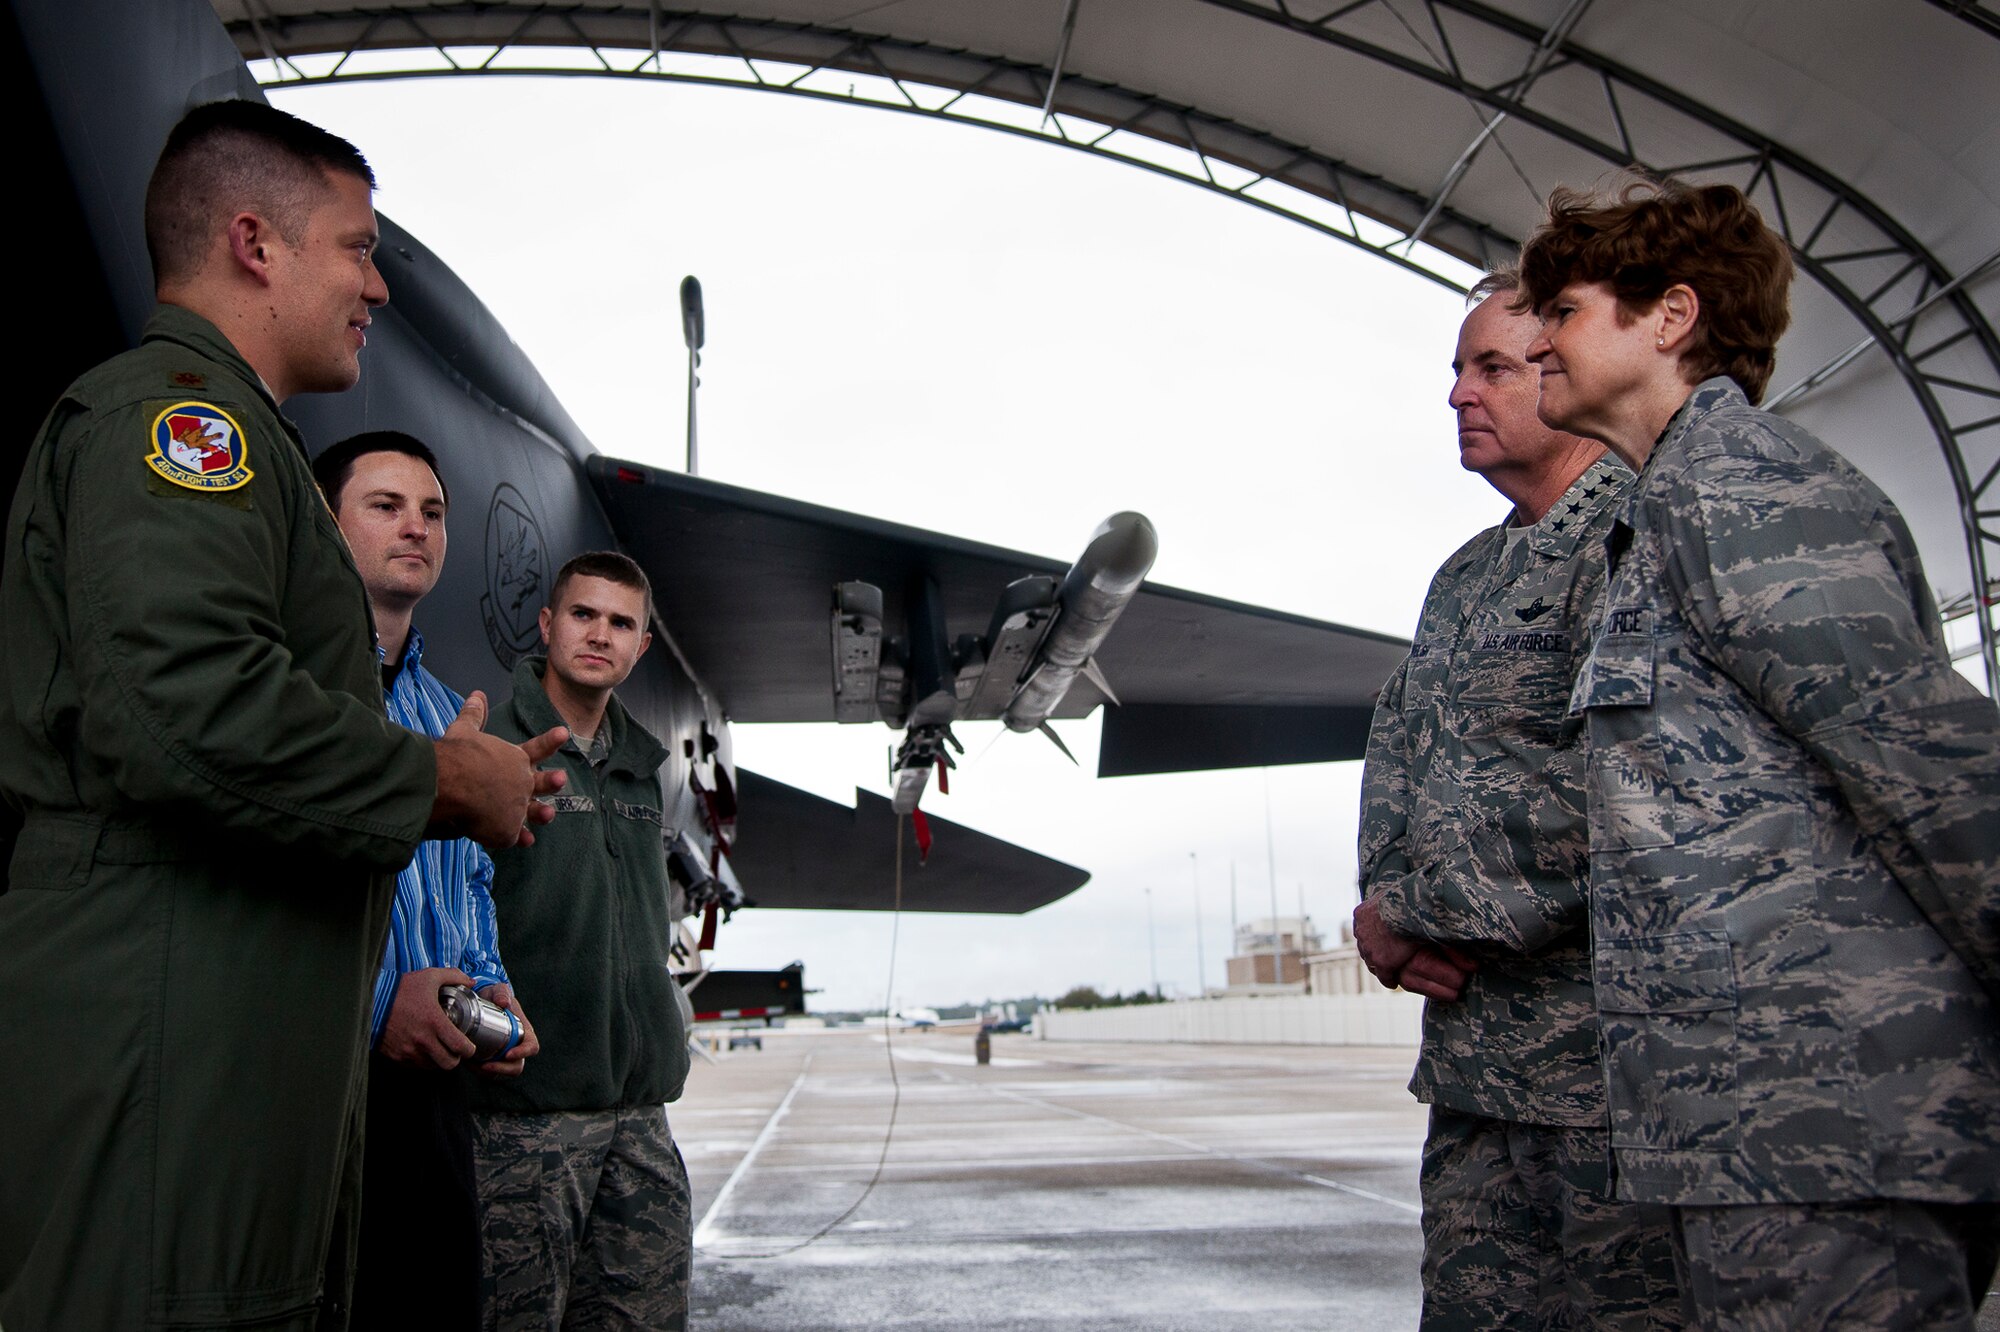 Maj. Ryan Sanford briefs Air Force Chief of Staff Gen. Mark A. Welsh III and Gen. Janet Wolfenbarger about the mission of the 40th Flight Test Squadron Jan. 27, 2014, at Eglin Air Force Base, Fla. The generals received the brief as part of a developmental and operation test orientation to the 96th Test Wing and the 53rd Wing. Wolfenbarger is the Air Force Materiel Command commander and Stanford is an F-15 Strike Eagle pilot with the 40th FTS. (U.S. Air Force photo/Samuel King Jr.)